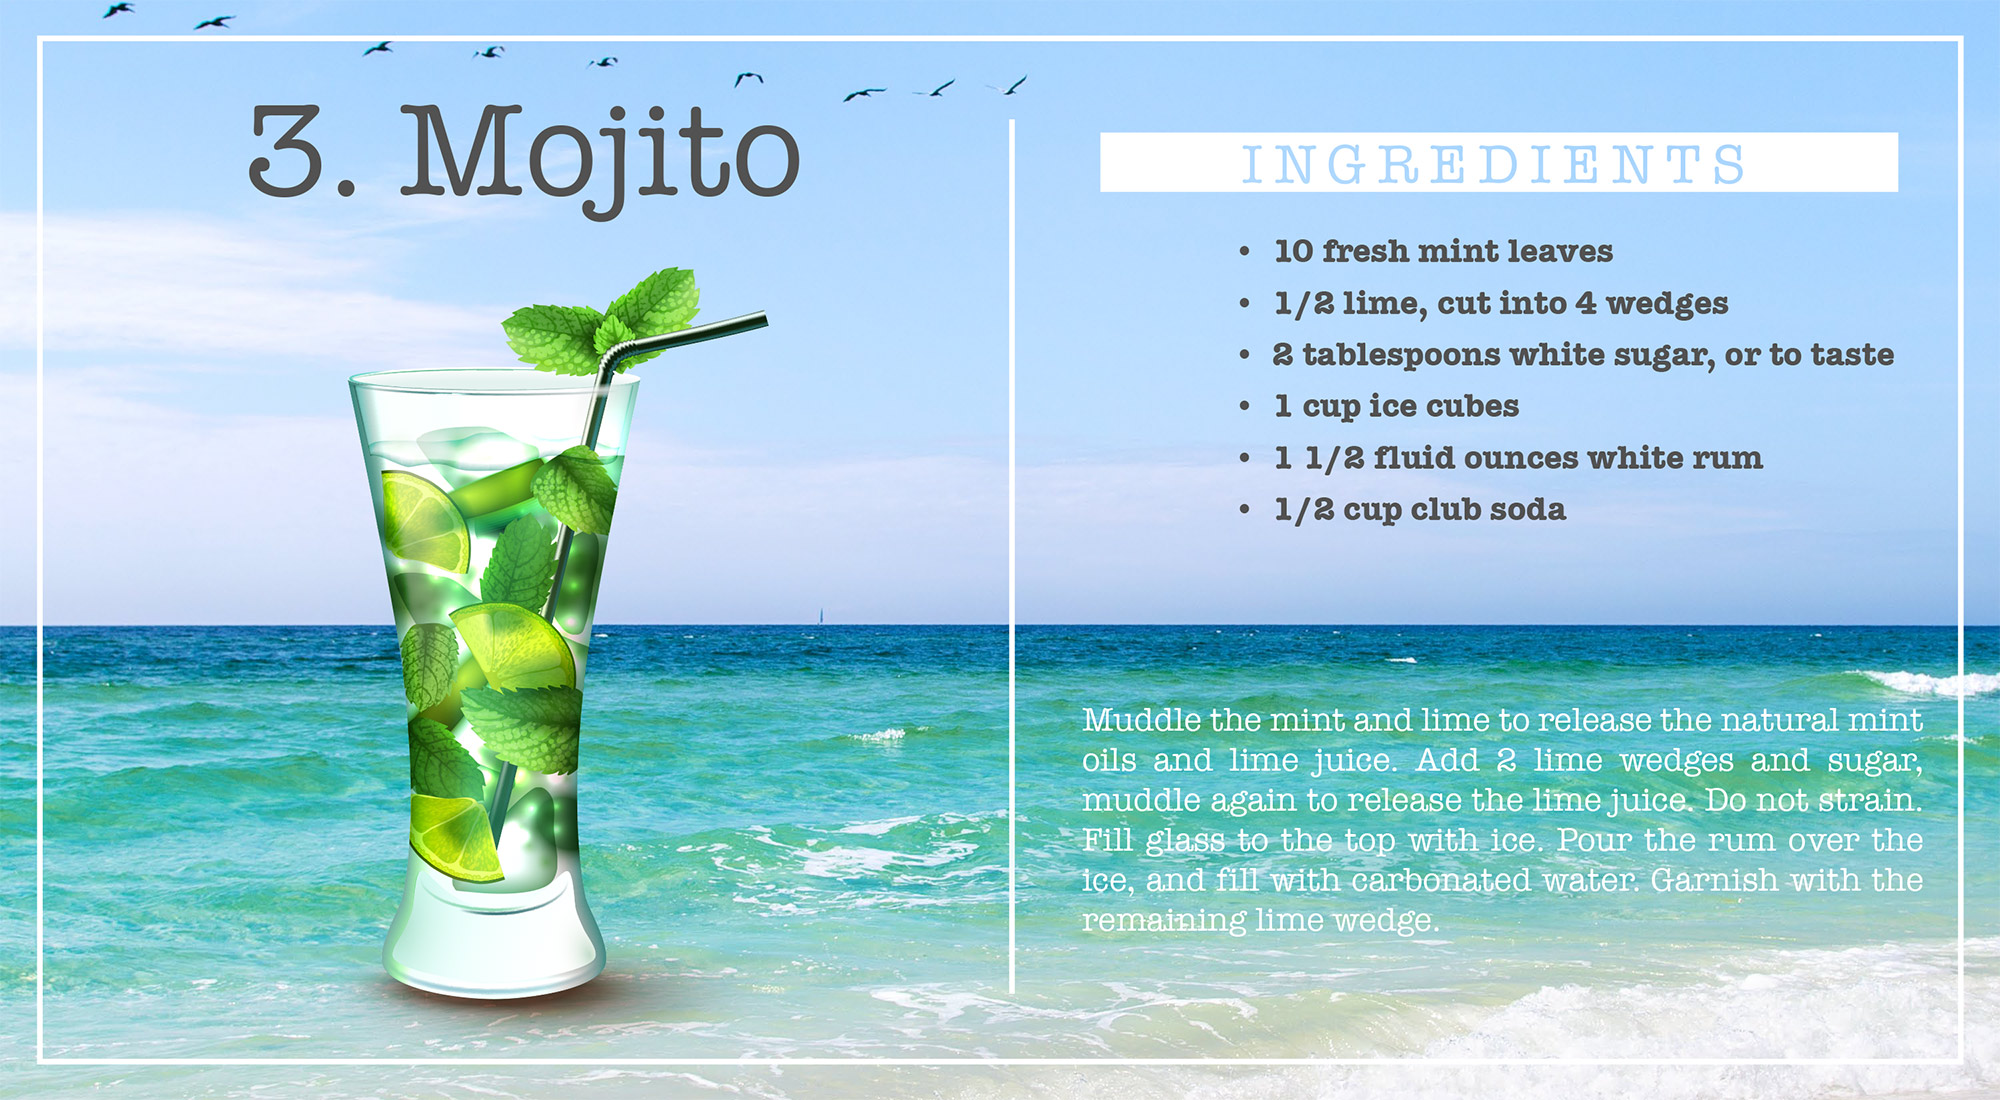 Mojito with Ingredients